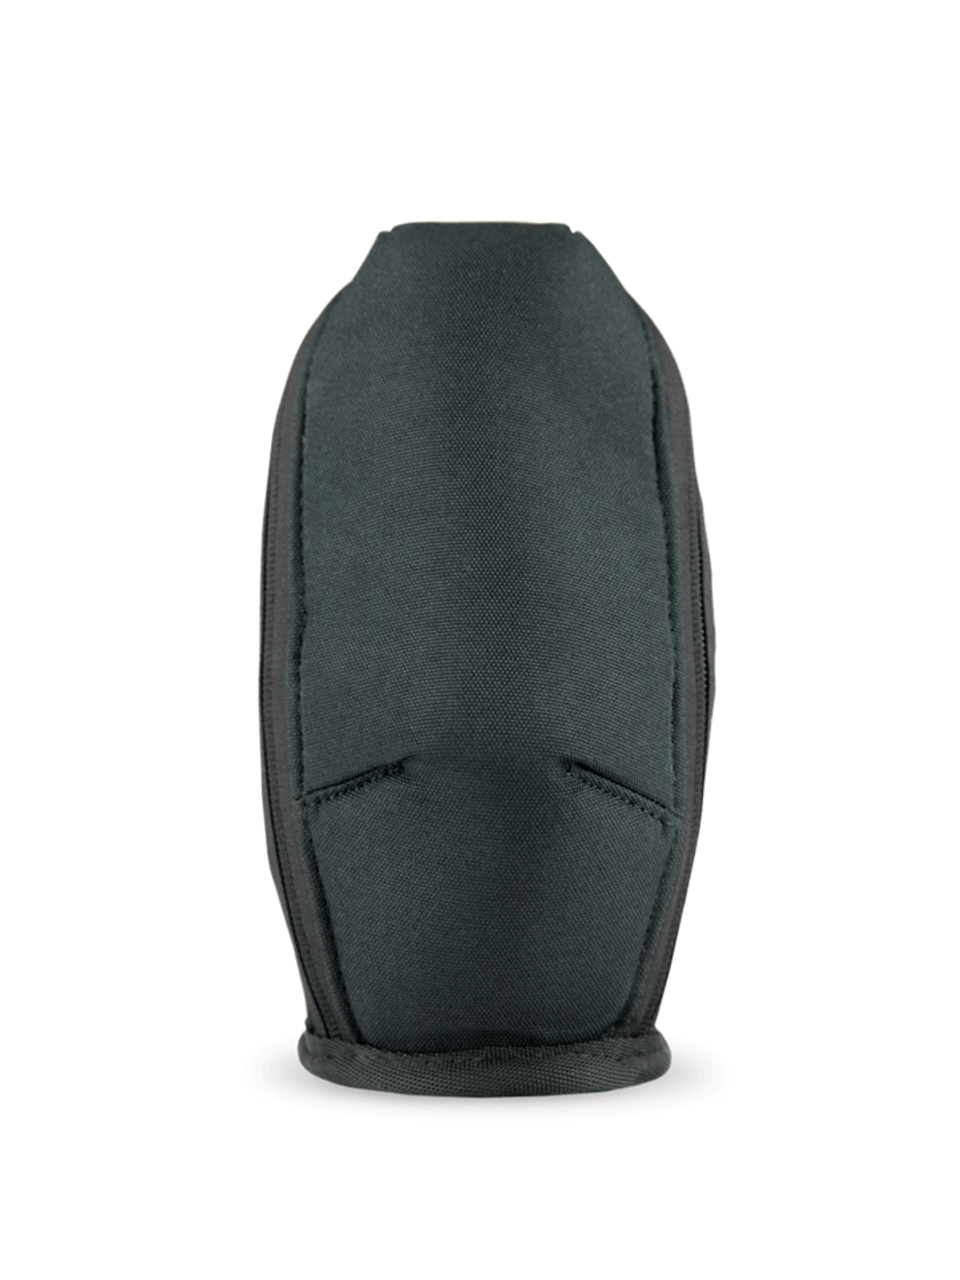 Puffco Peak Bag front view, sleek black protective case, designed for vaporizers